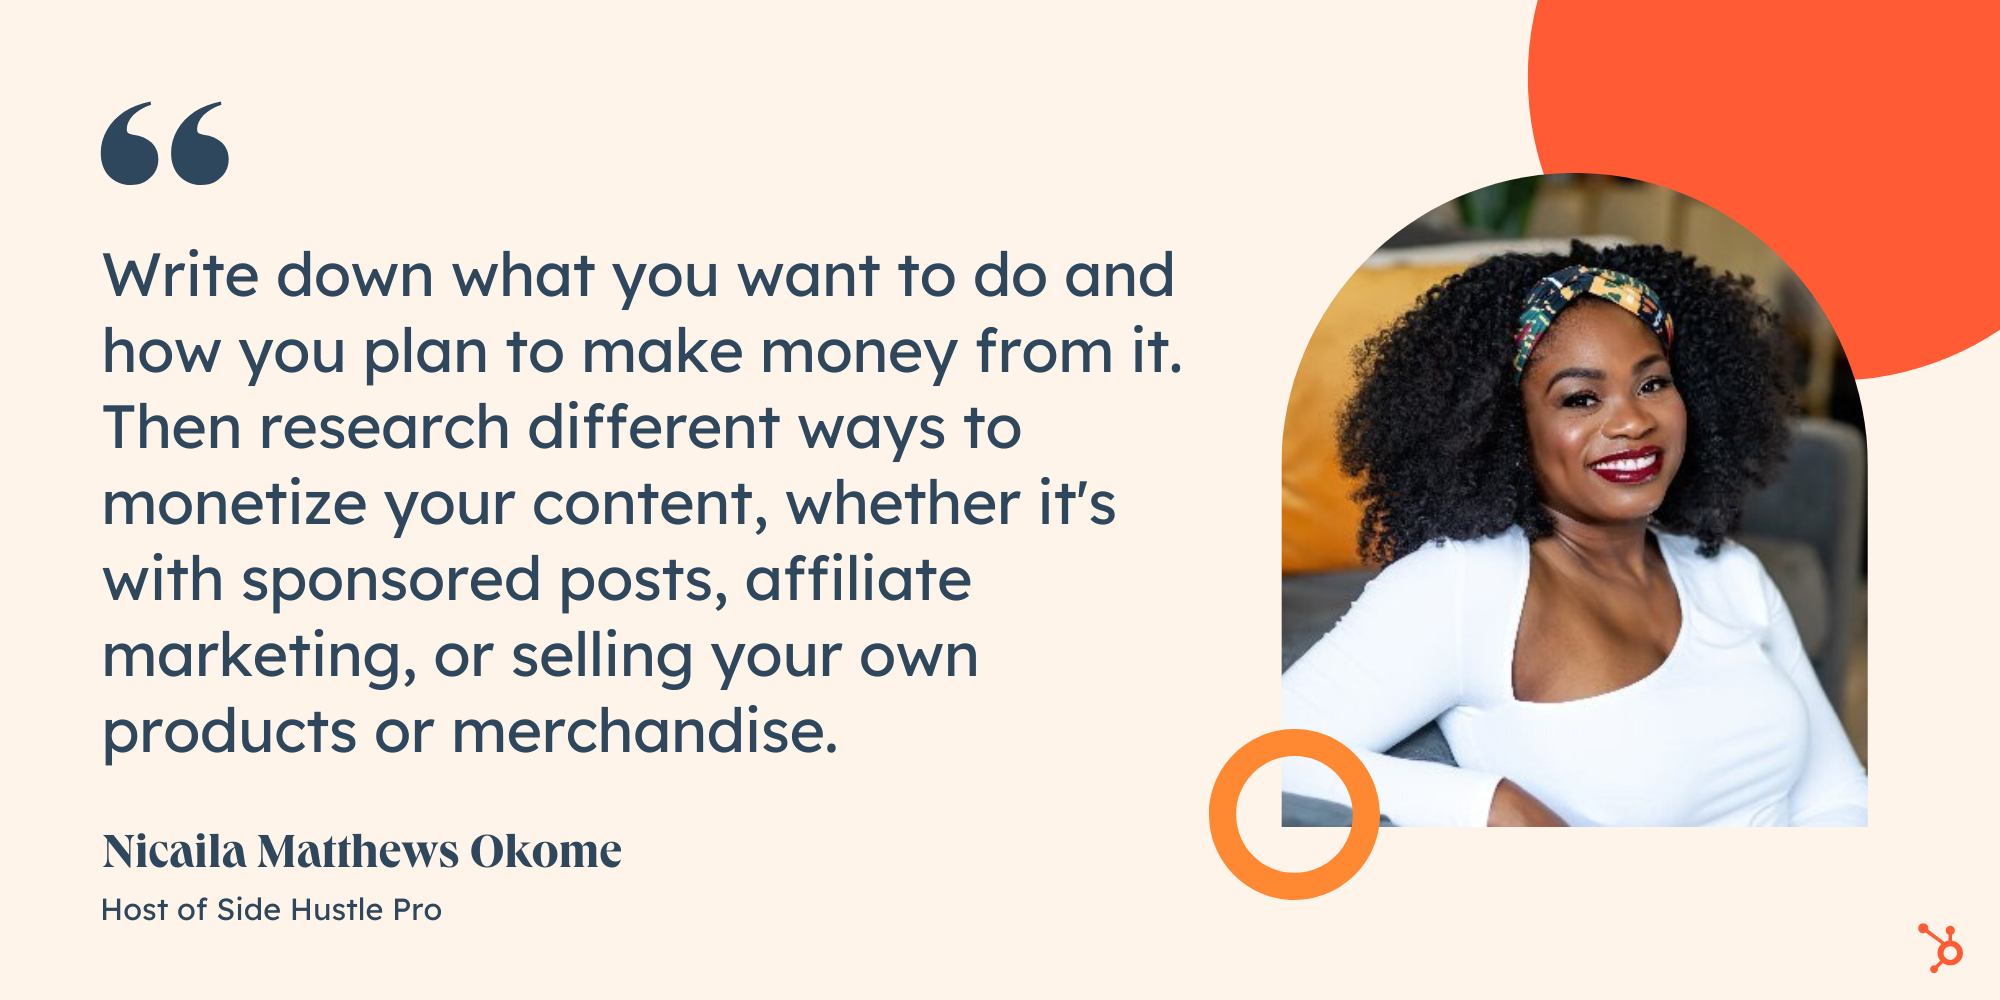 Nicaila Matthews Okome on becoming a full-time content creator